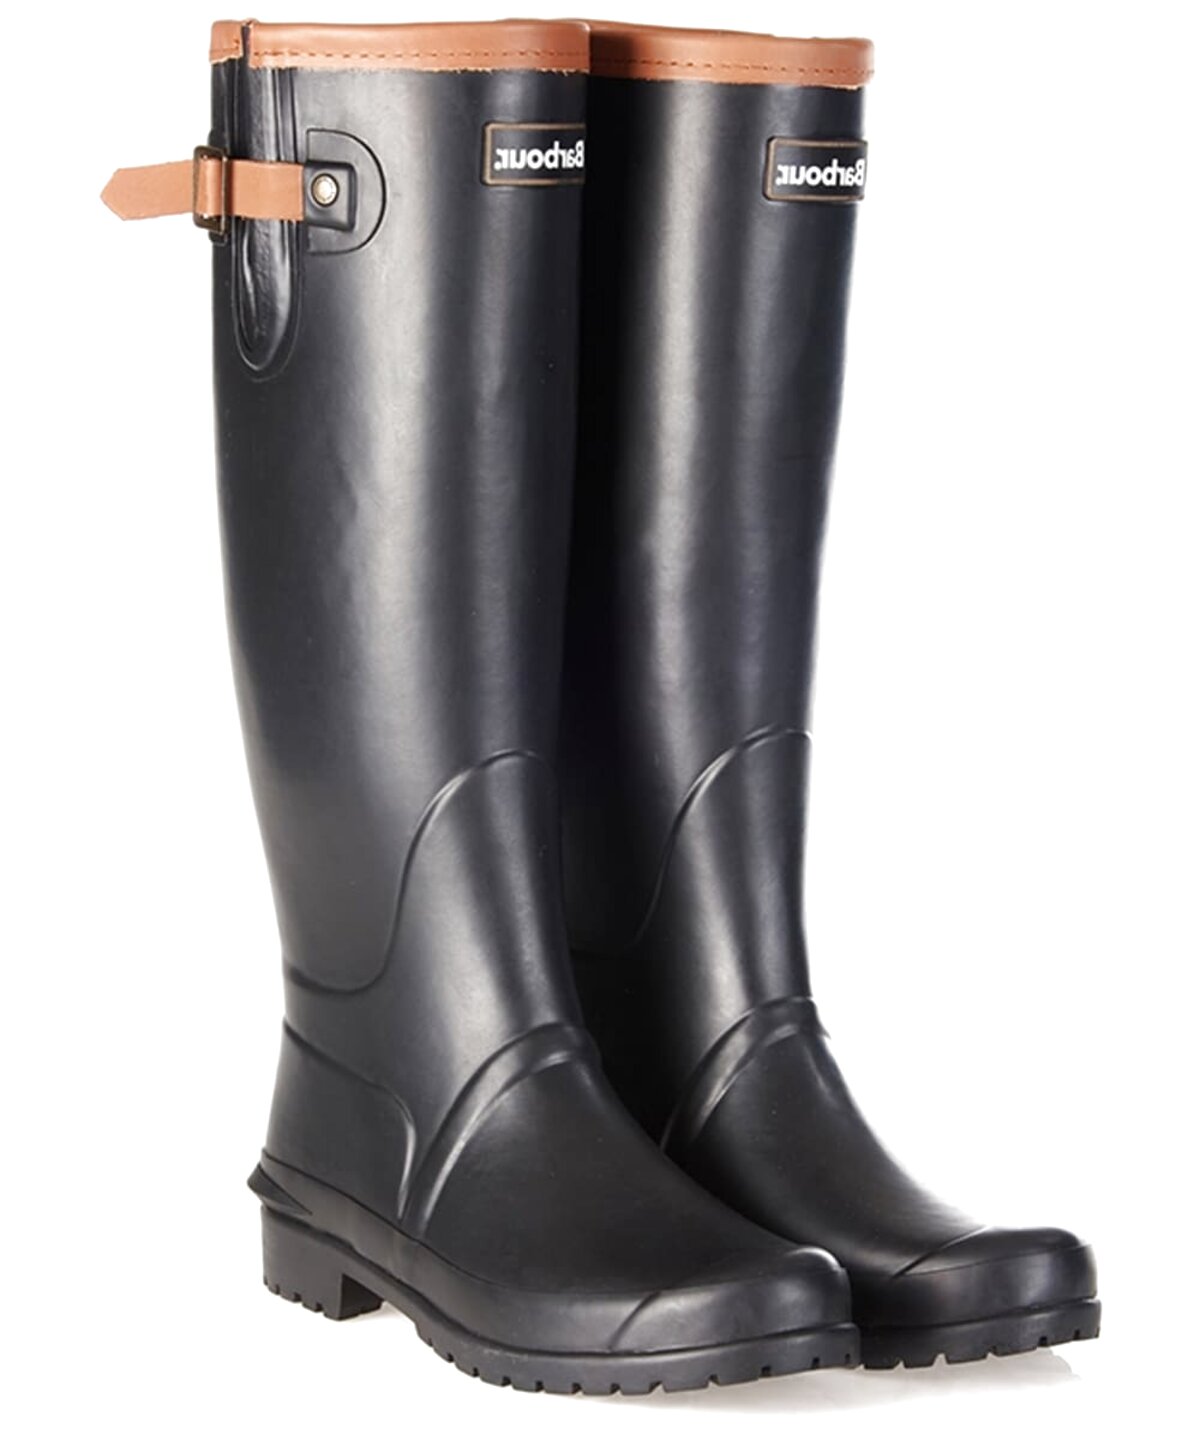 Barbour Wellingtons for sale in UK | 64 used Barbour Wellingtons